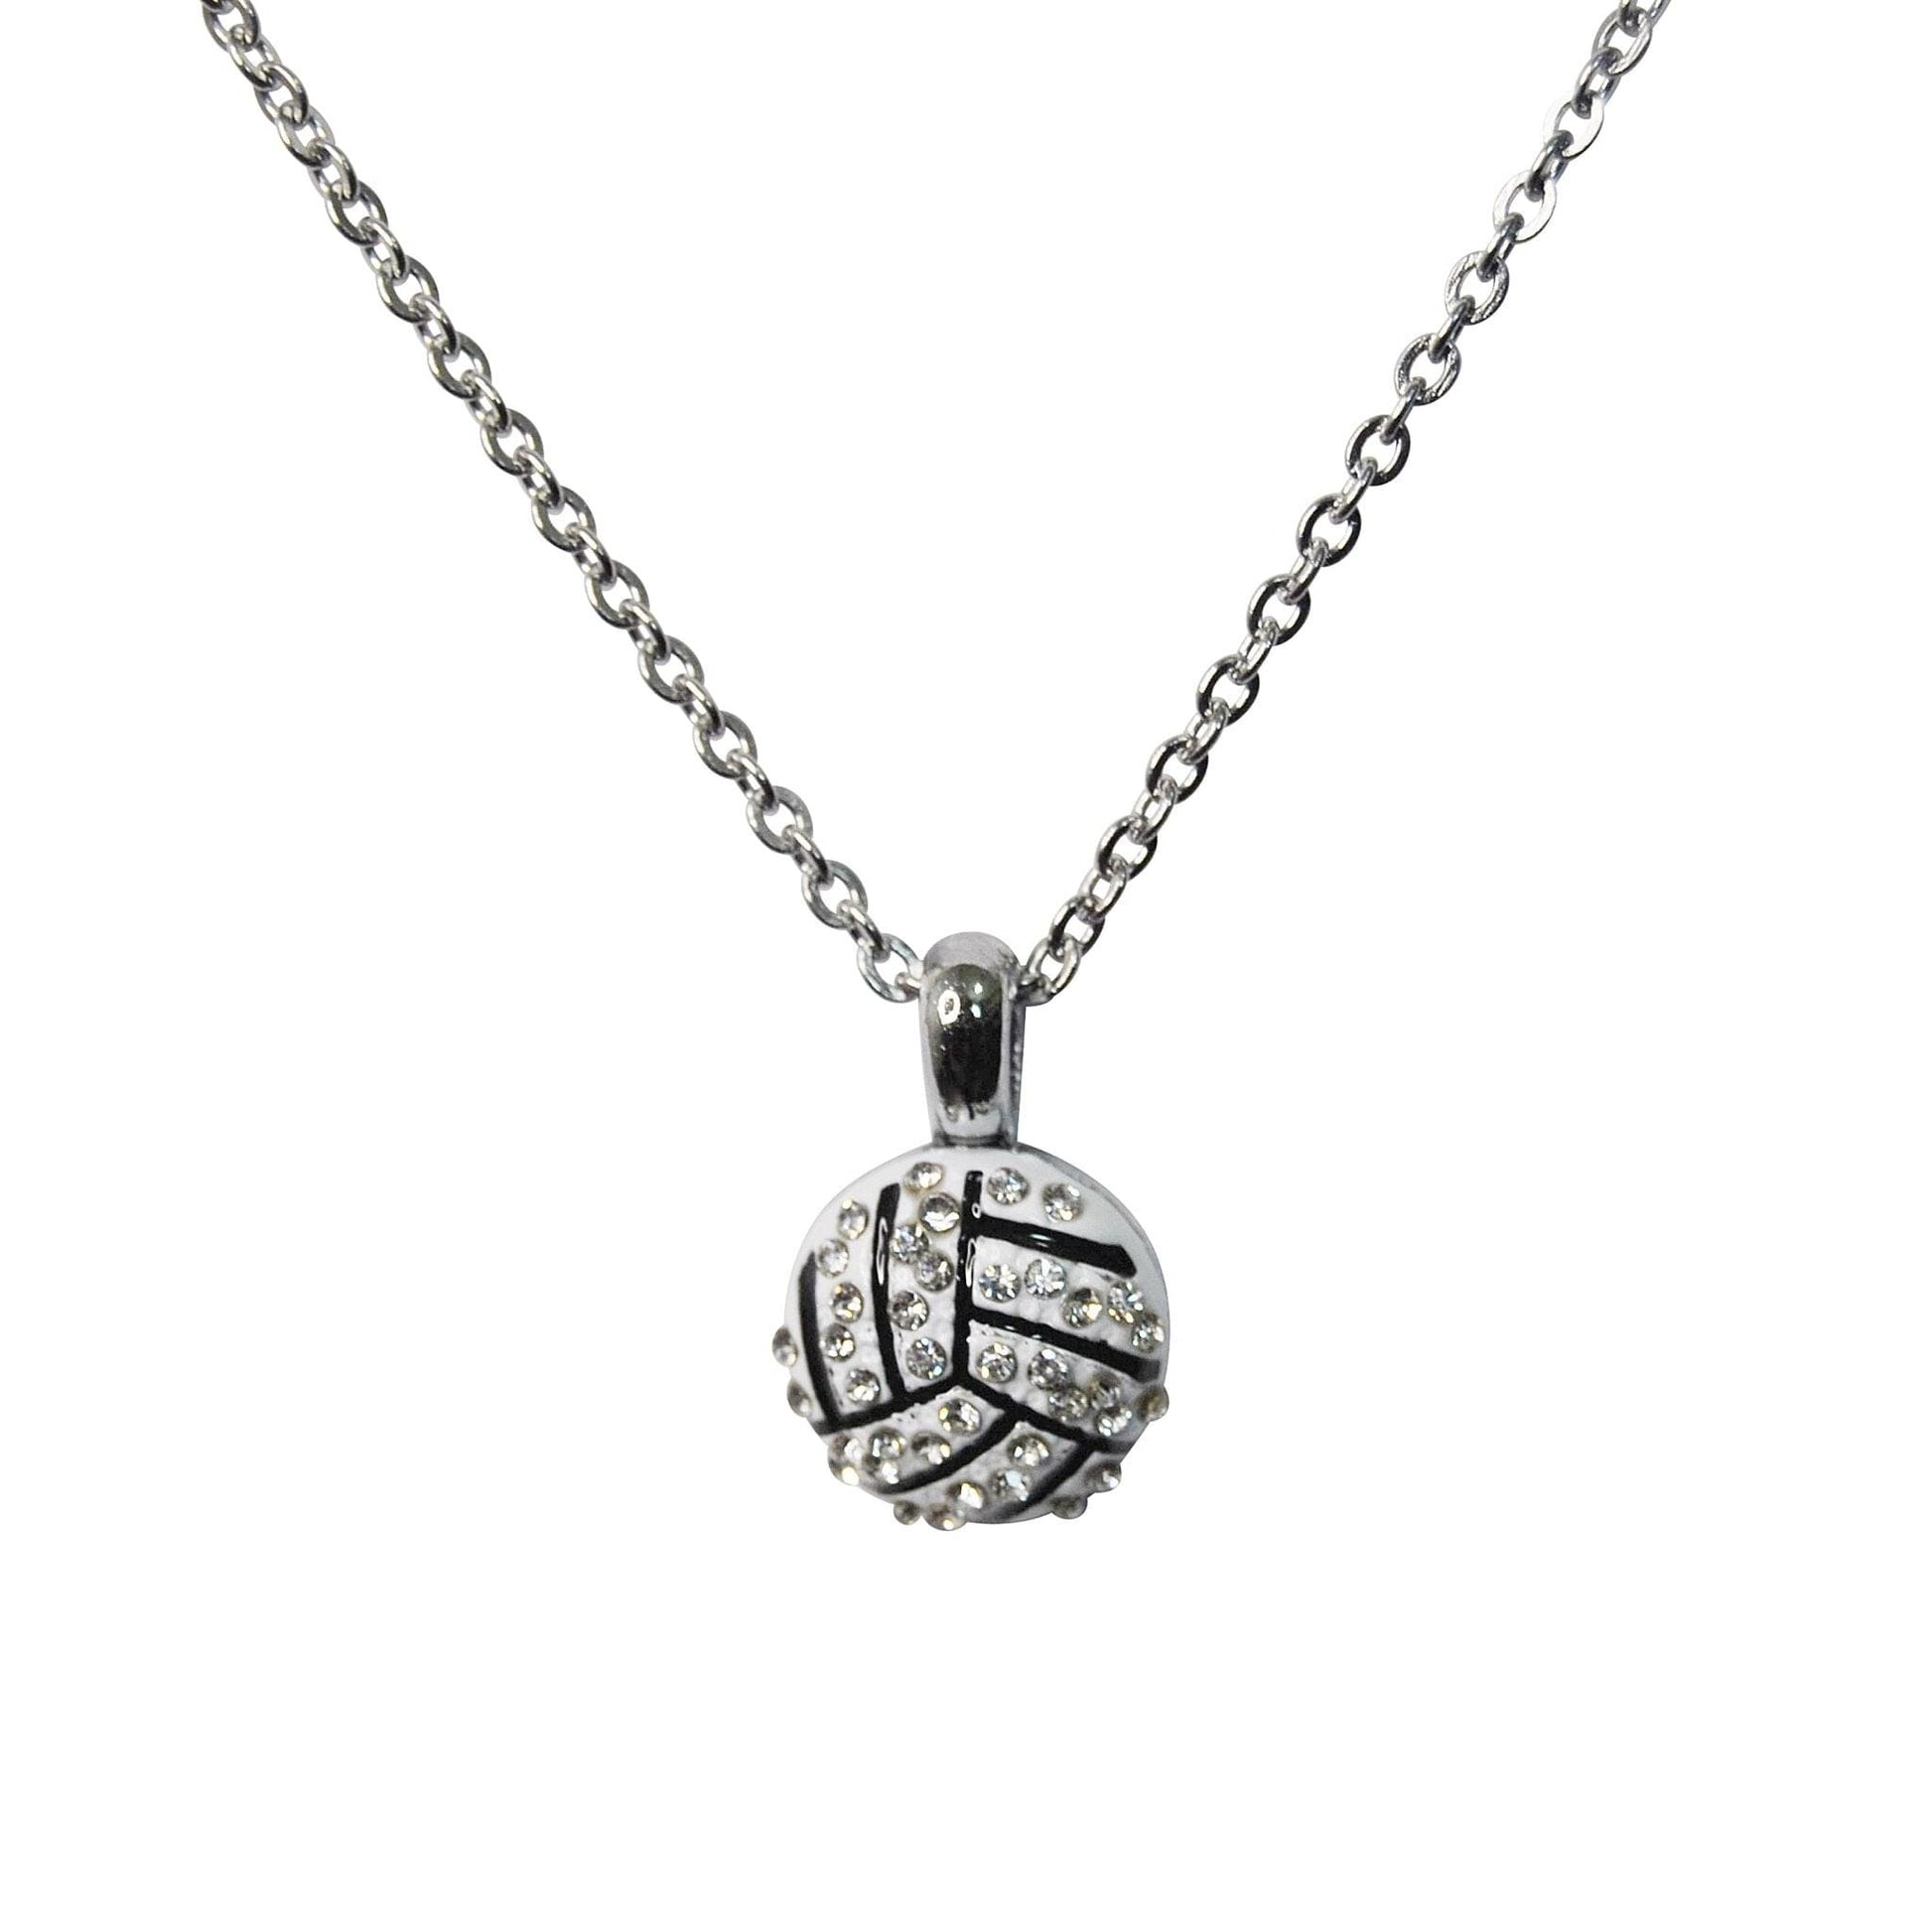 Studded Volleyball Pendant and Chain Necklace-STD-VYBL-24